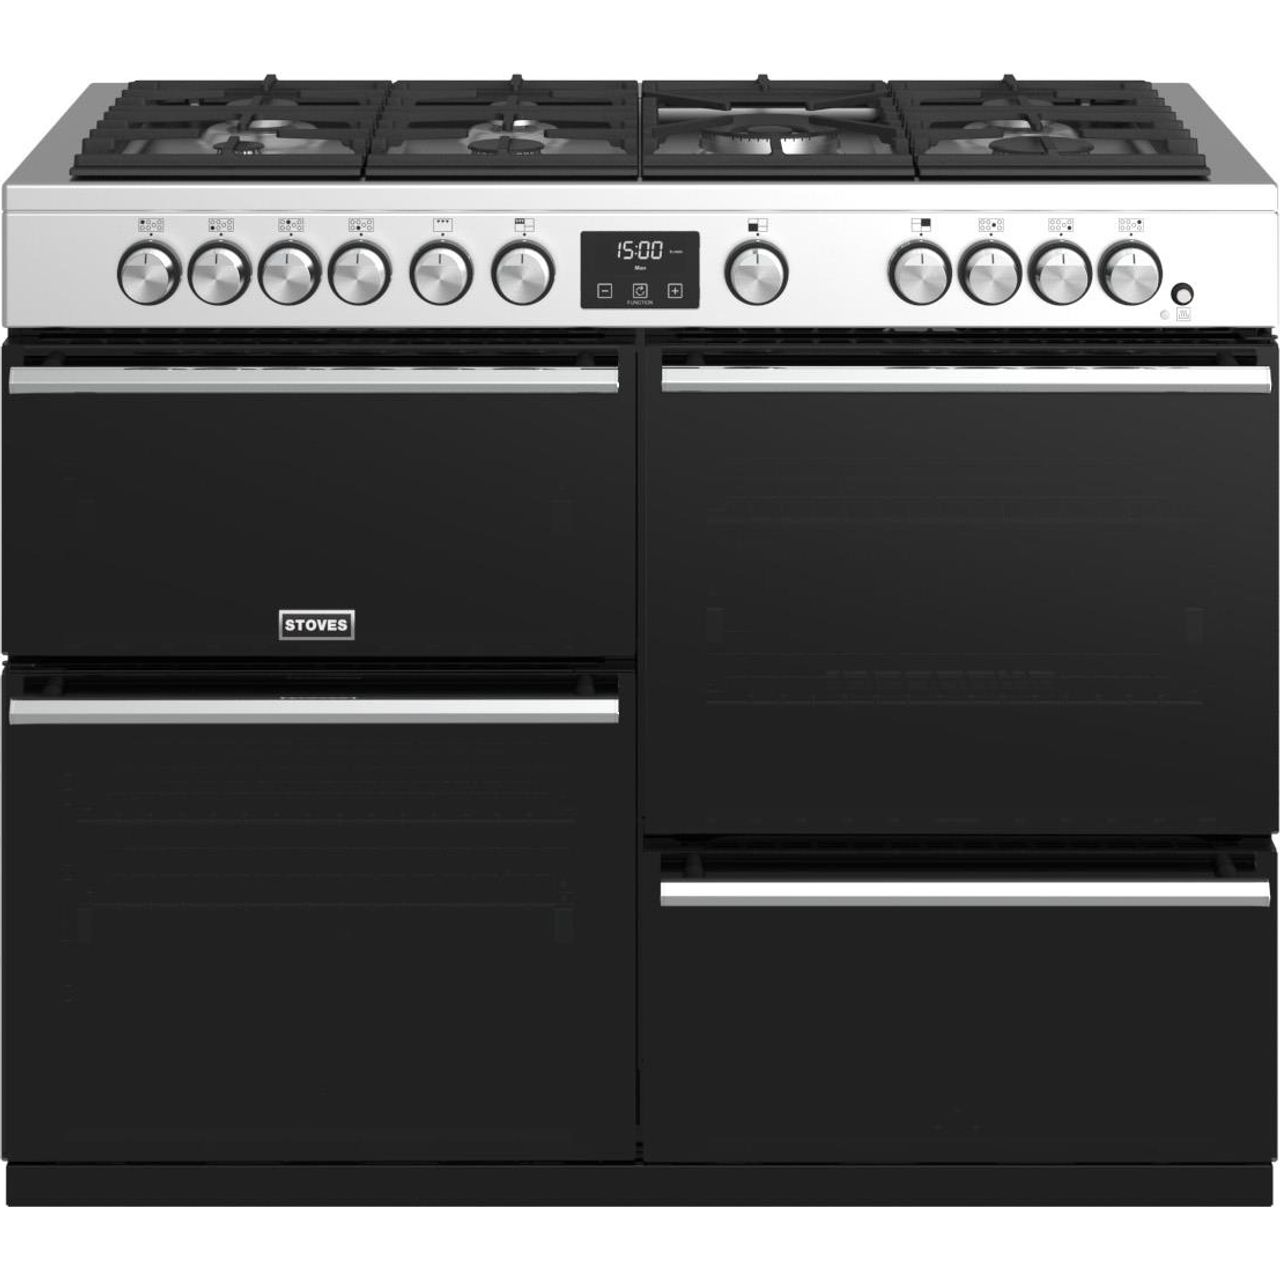 Stoves Precision DX S1100G 110cm Gas Range Cooker with Electric Grill Review